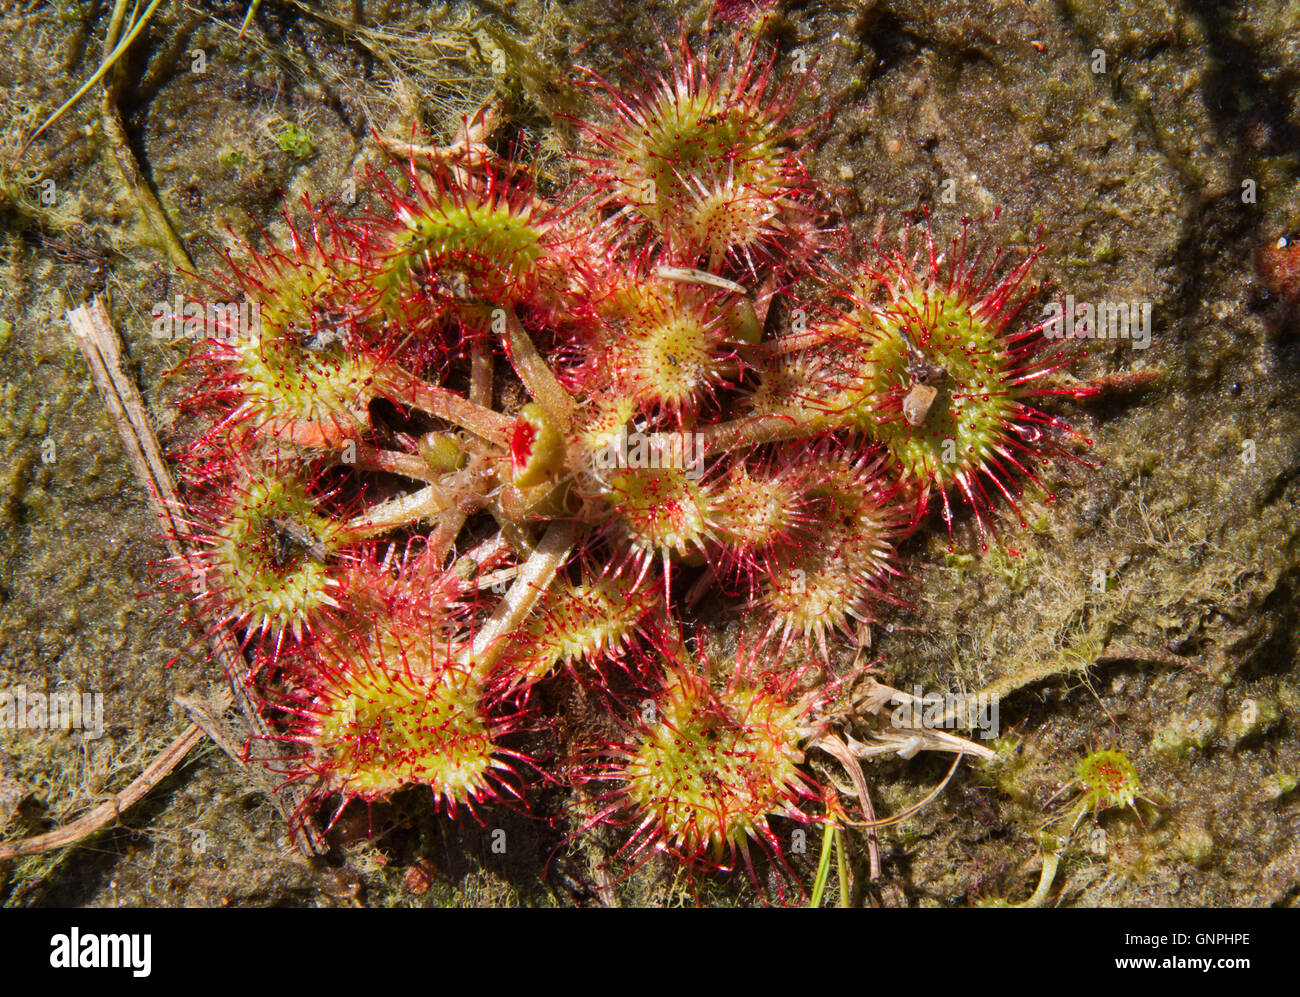 Tentacles of Round-leaved sundew or Common sundew (Drosera rotundifolia), with remainders of digested insects Stock Photo